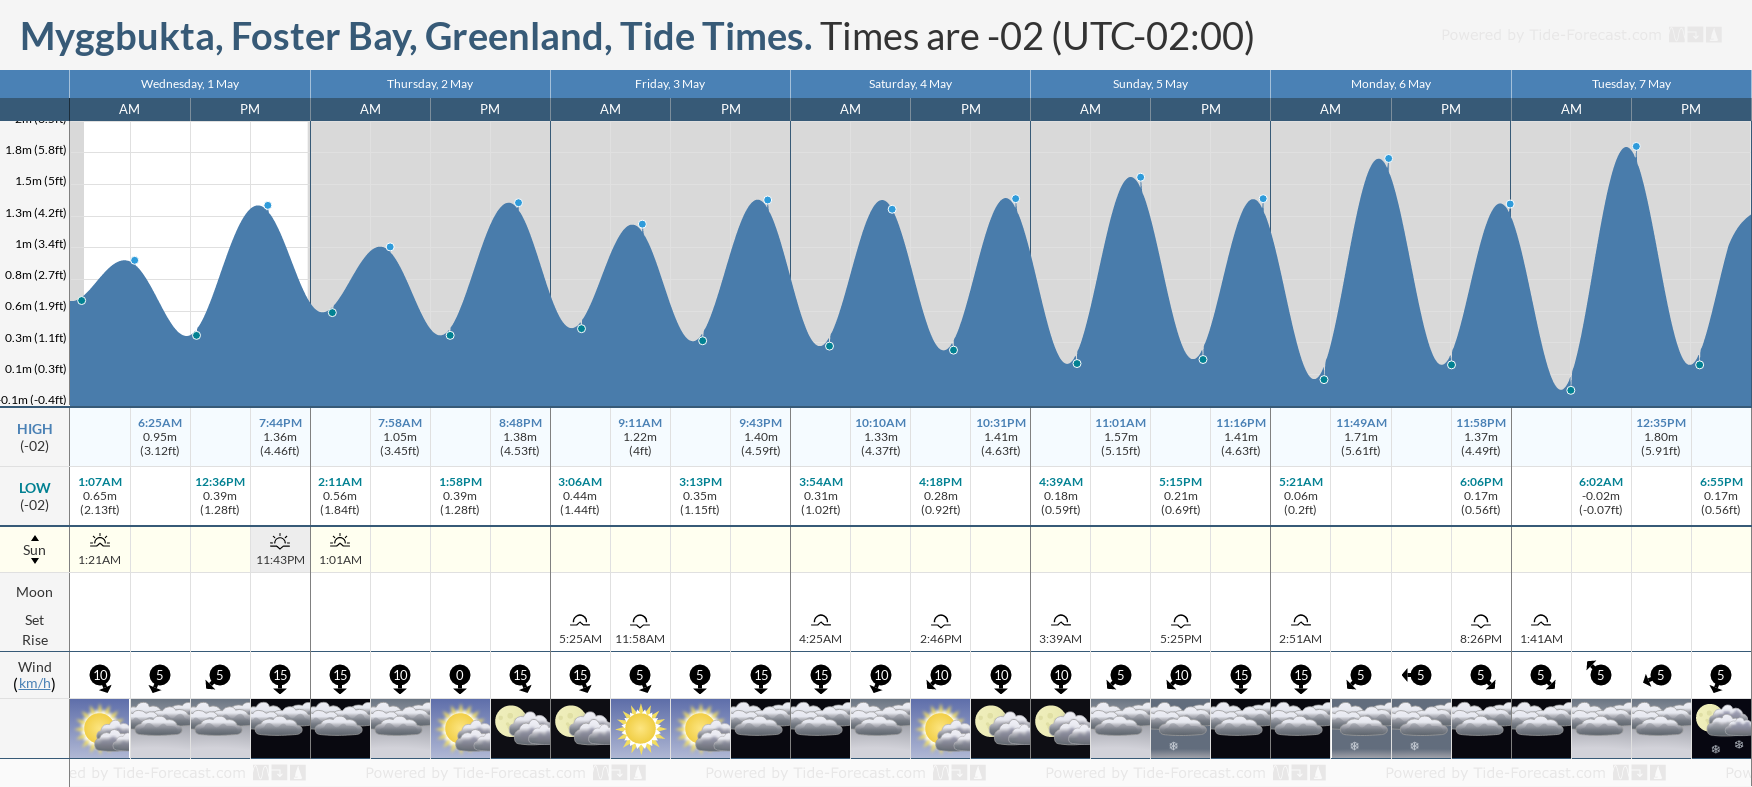 Myggbukta, Foster Bay, Greenland Tide Chart including high and low tide times for the next 7 days